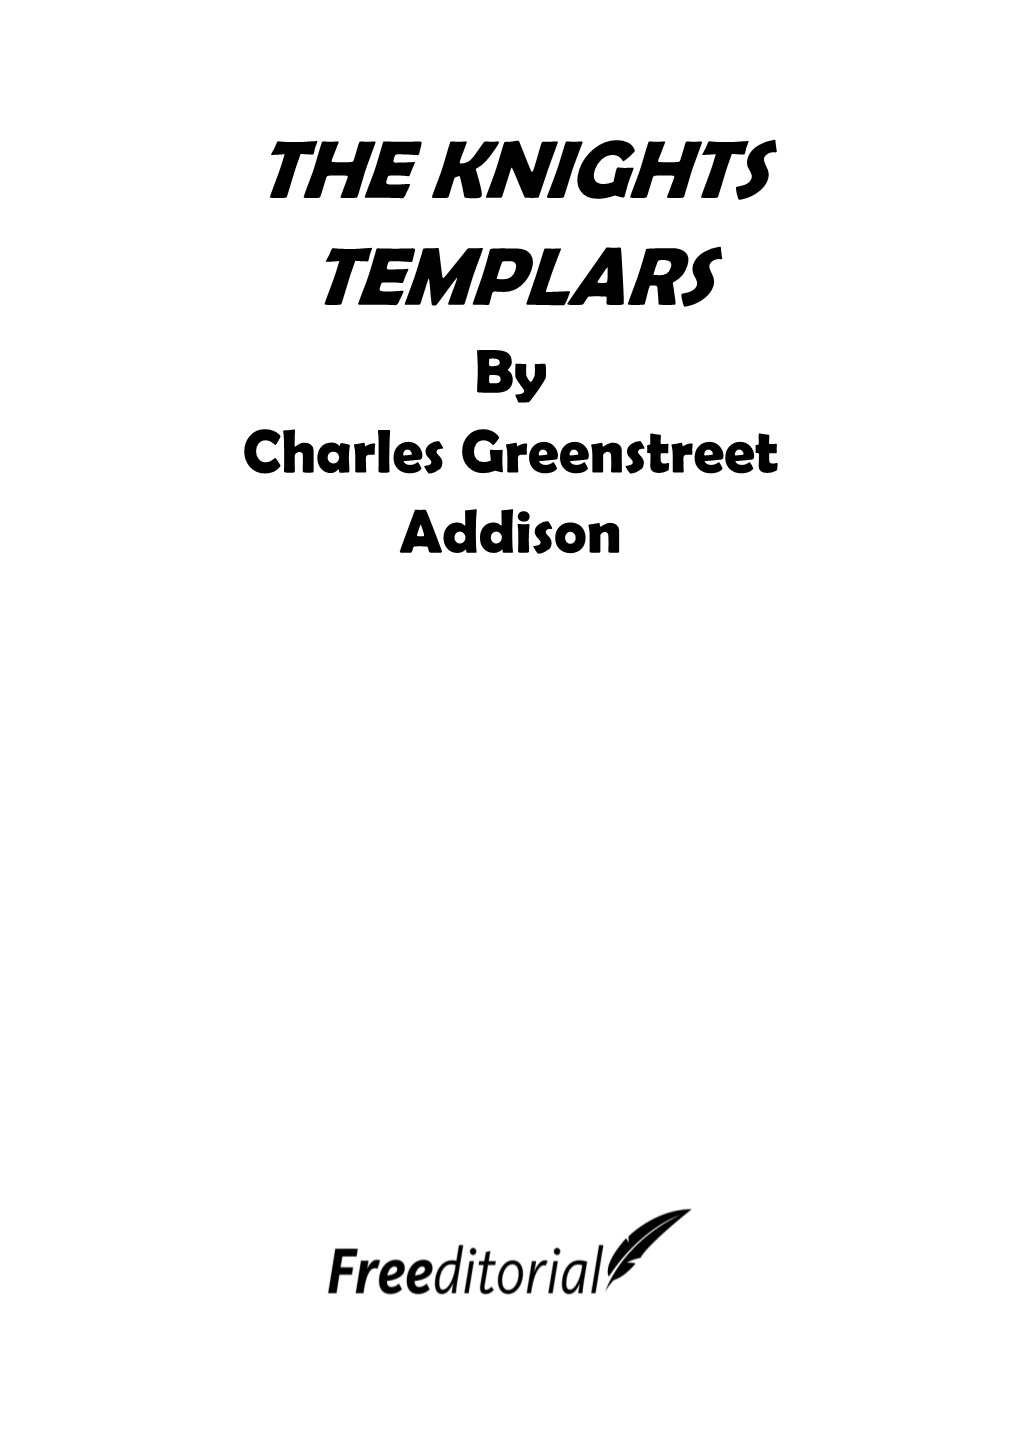 THE KNIGHTS TEMPLARS by Charles Greenstreet Addison